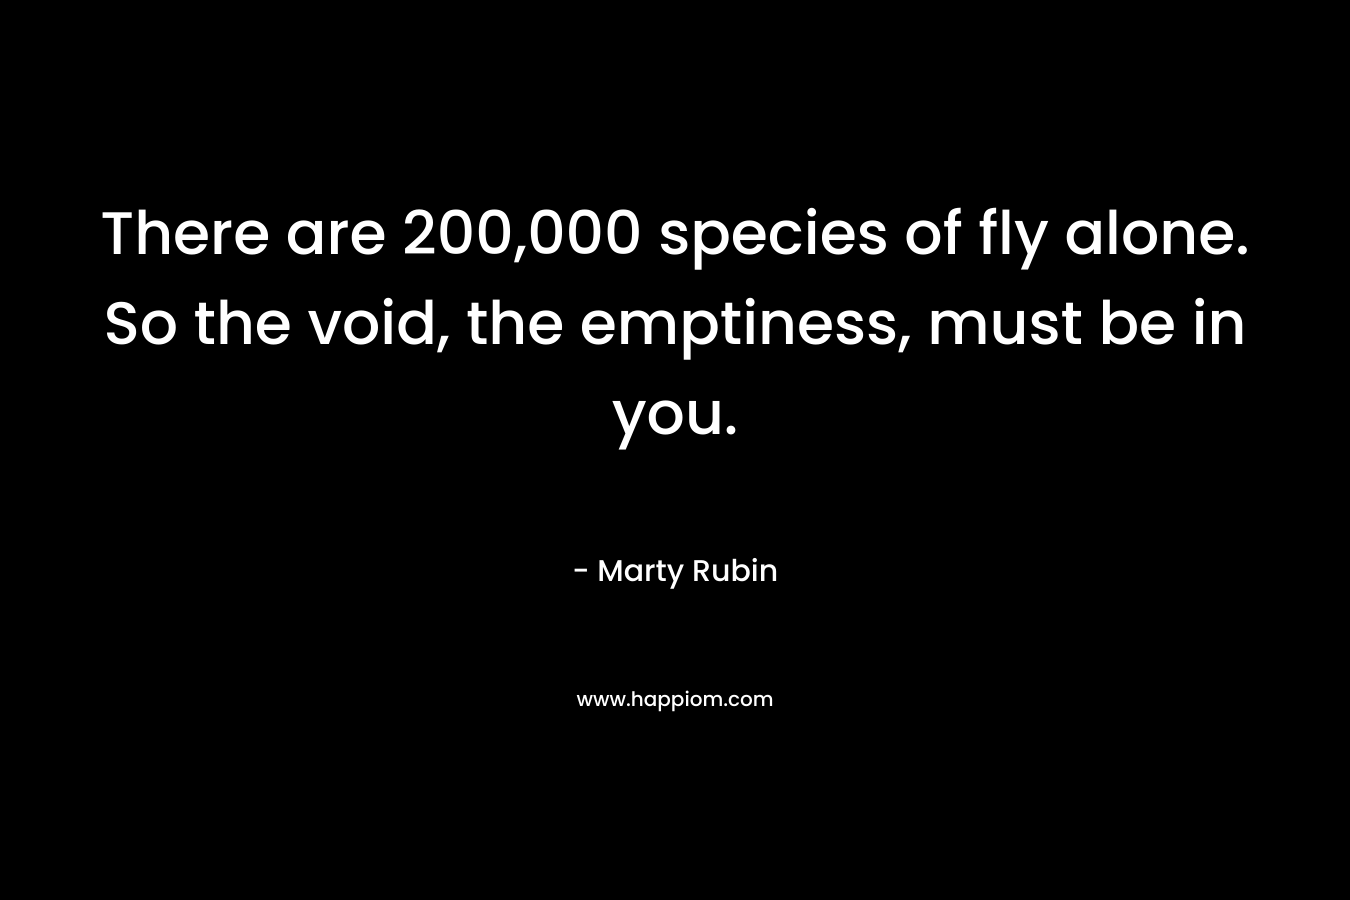 There are 200,000 species of fly alone. So the void, the emptiness, must be in you.